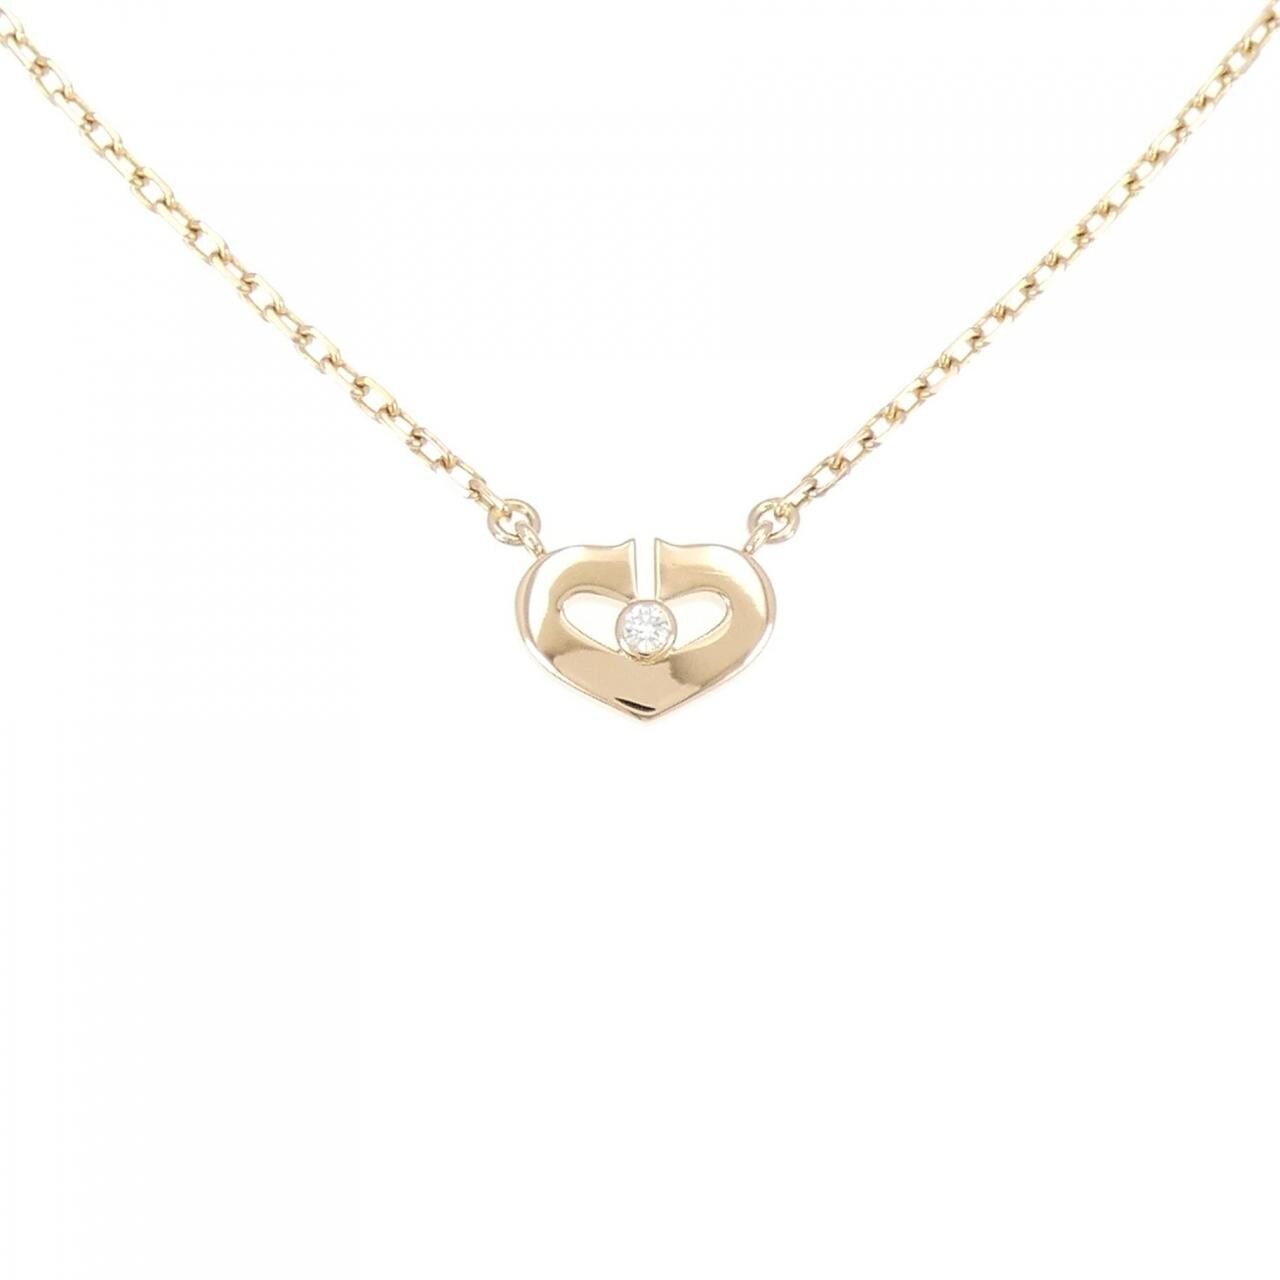 Cartier C heart small necklace